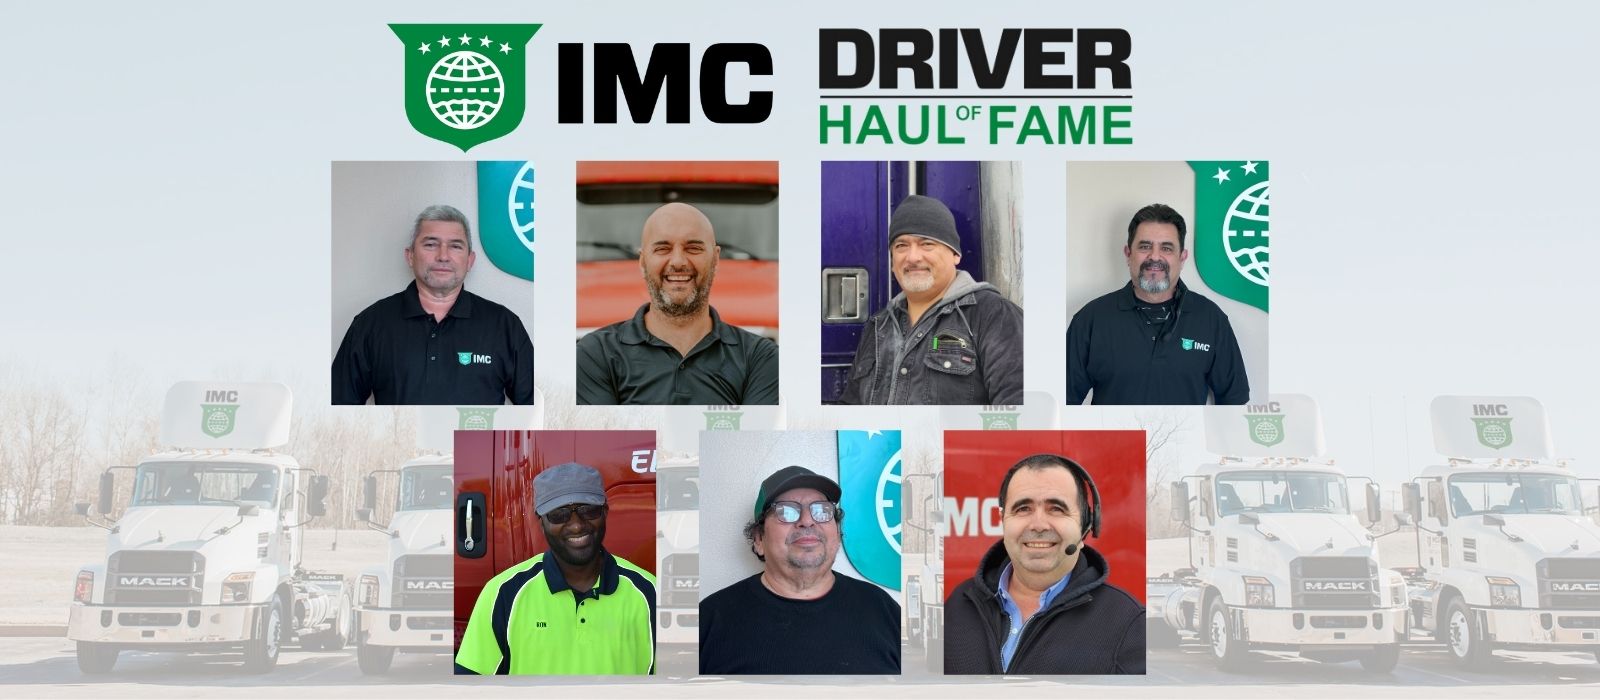 IMC Inducts Seven 20 Year Tenured Drivers into the 'Haul of Fame'